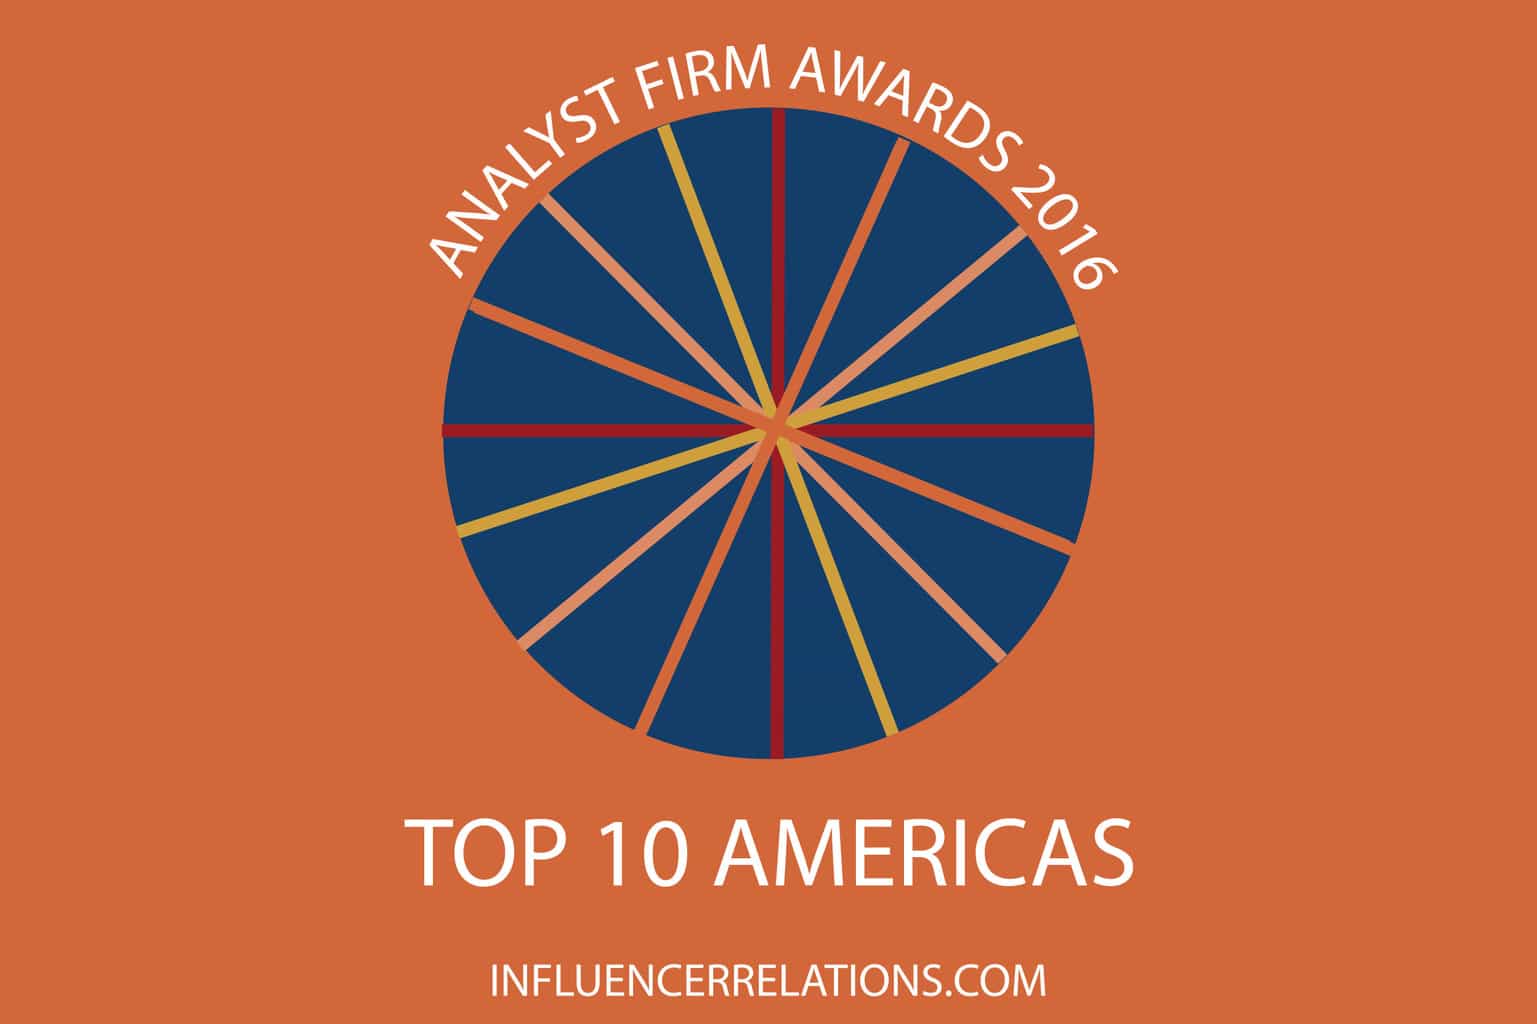 Analyst Firm Awards 2016: Top 10 Americas